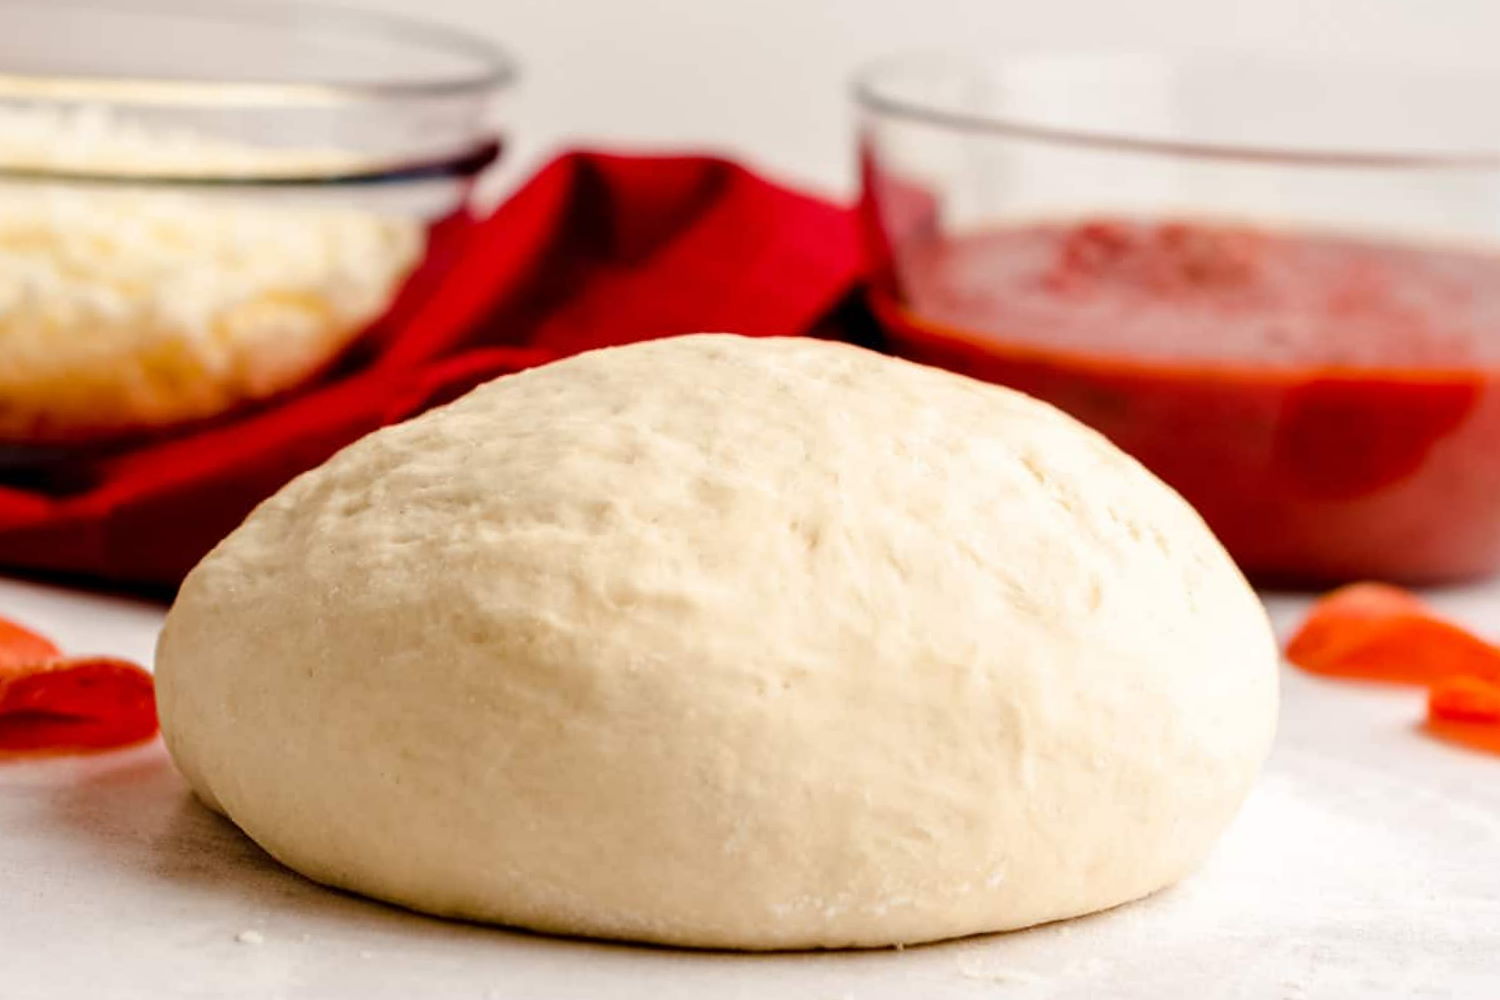 The ideal conditions for storing pizza dough overnight